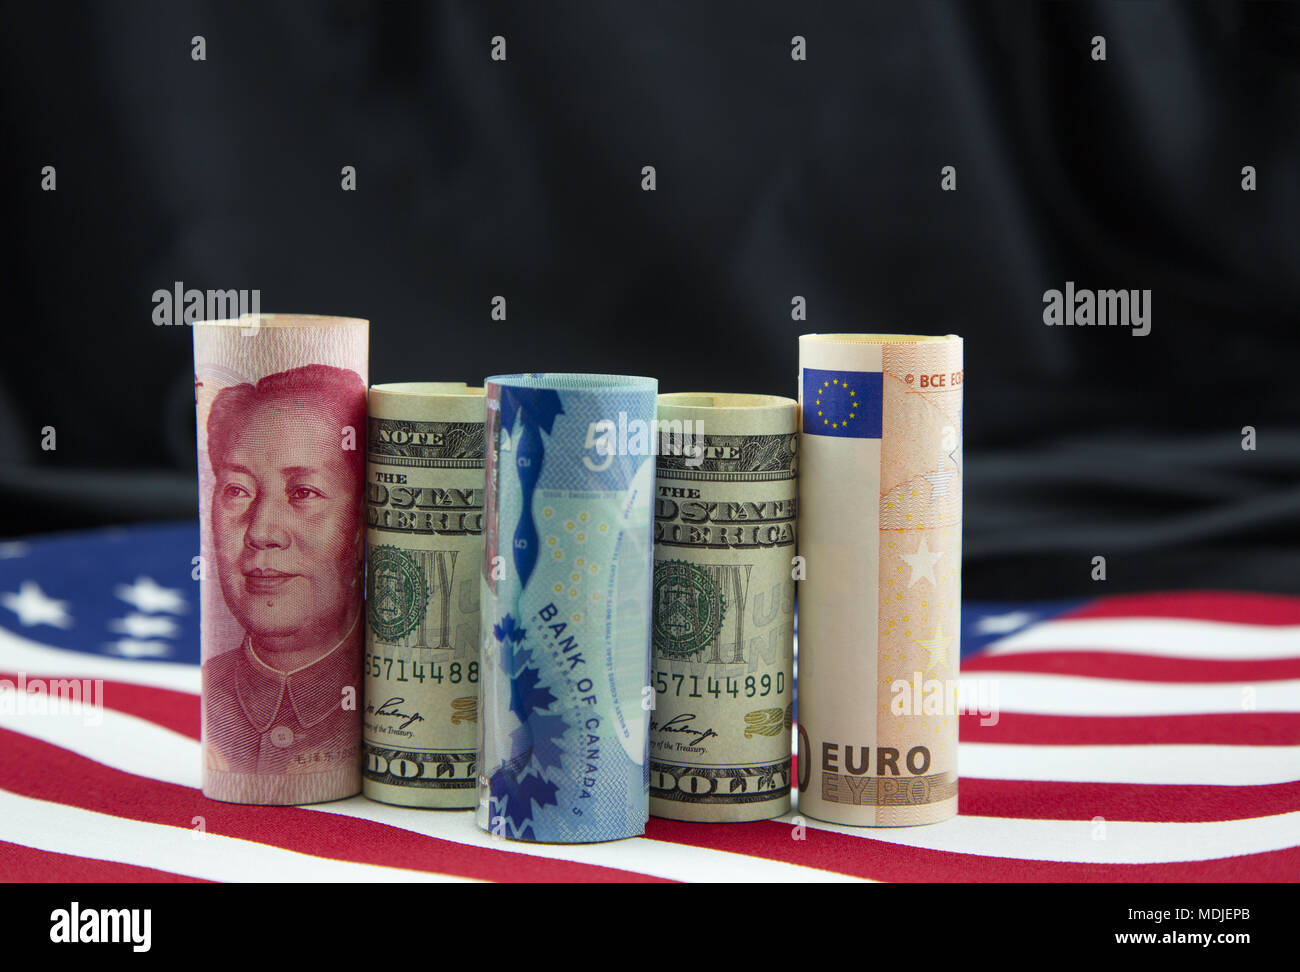 National currencies from China, United States, Canada, and European Union placed on American flag  reflect global nature of business Stock Photo